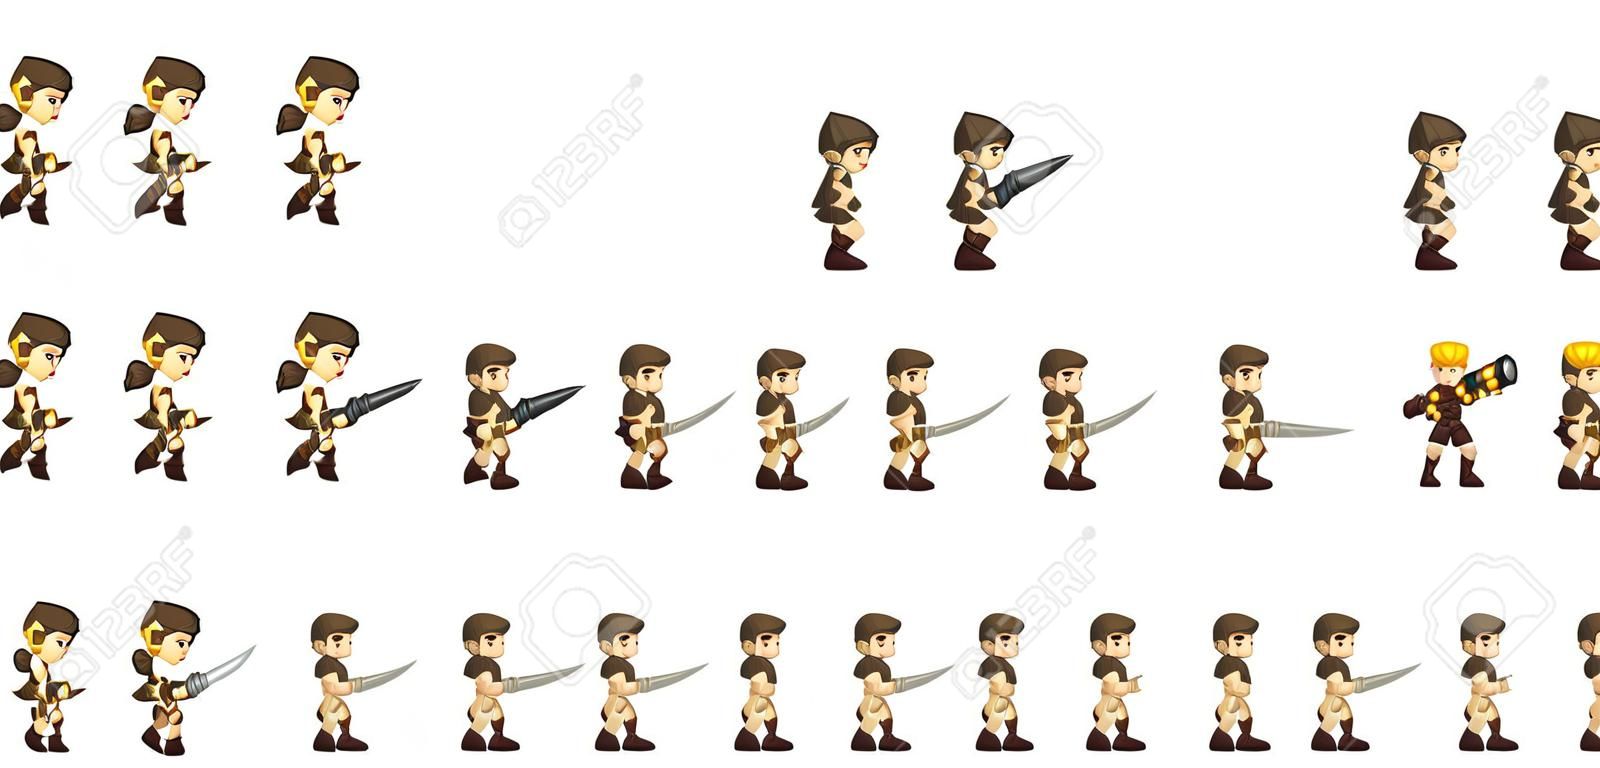 Animated jungle hunter game character sprites